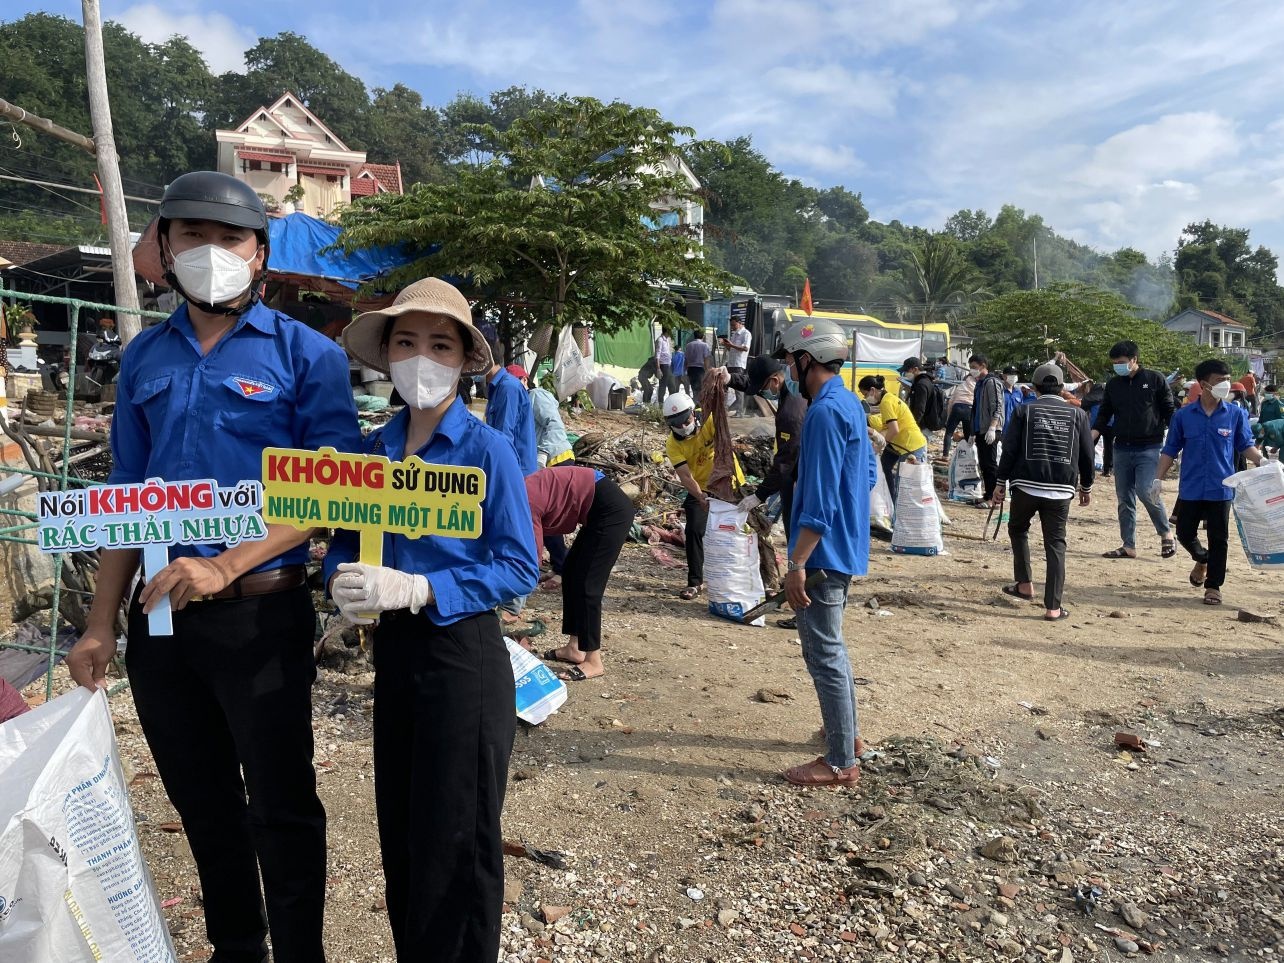 To further raise awareness within the local community and online, volunteers were equipped with colourful signs and posters stating clear messages like “Say no to plastic waste“ and “Don’t use single-use plastics“